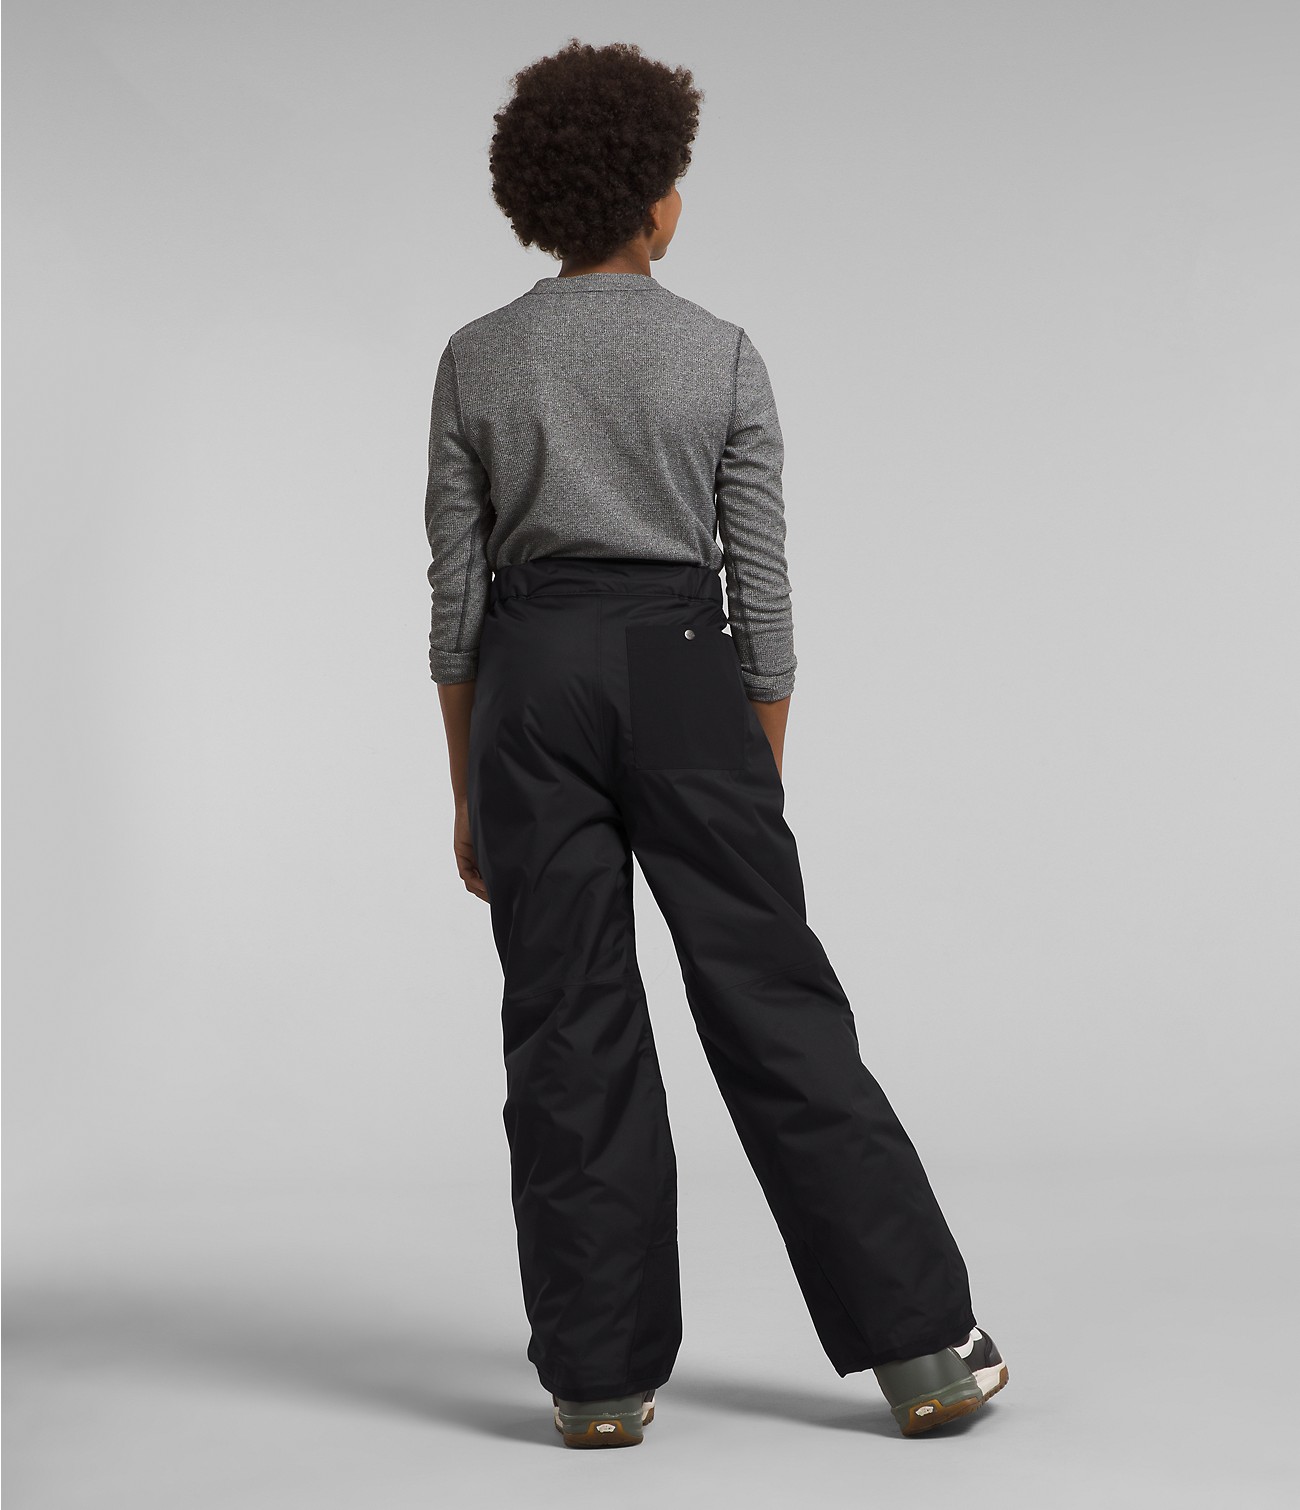 Boys’ Freedom Insulated Pants | The North Face